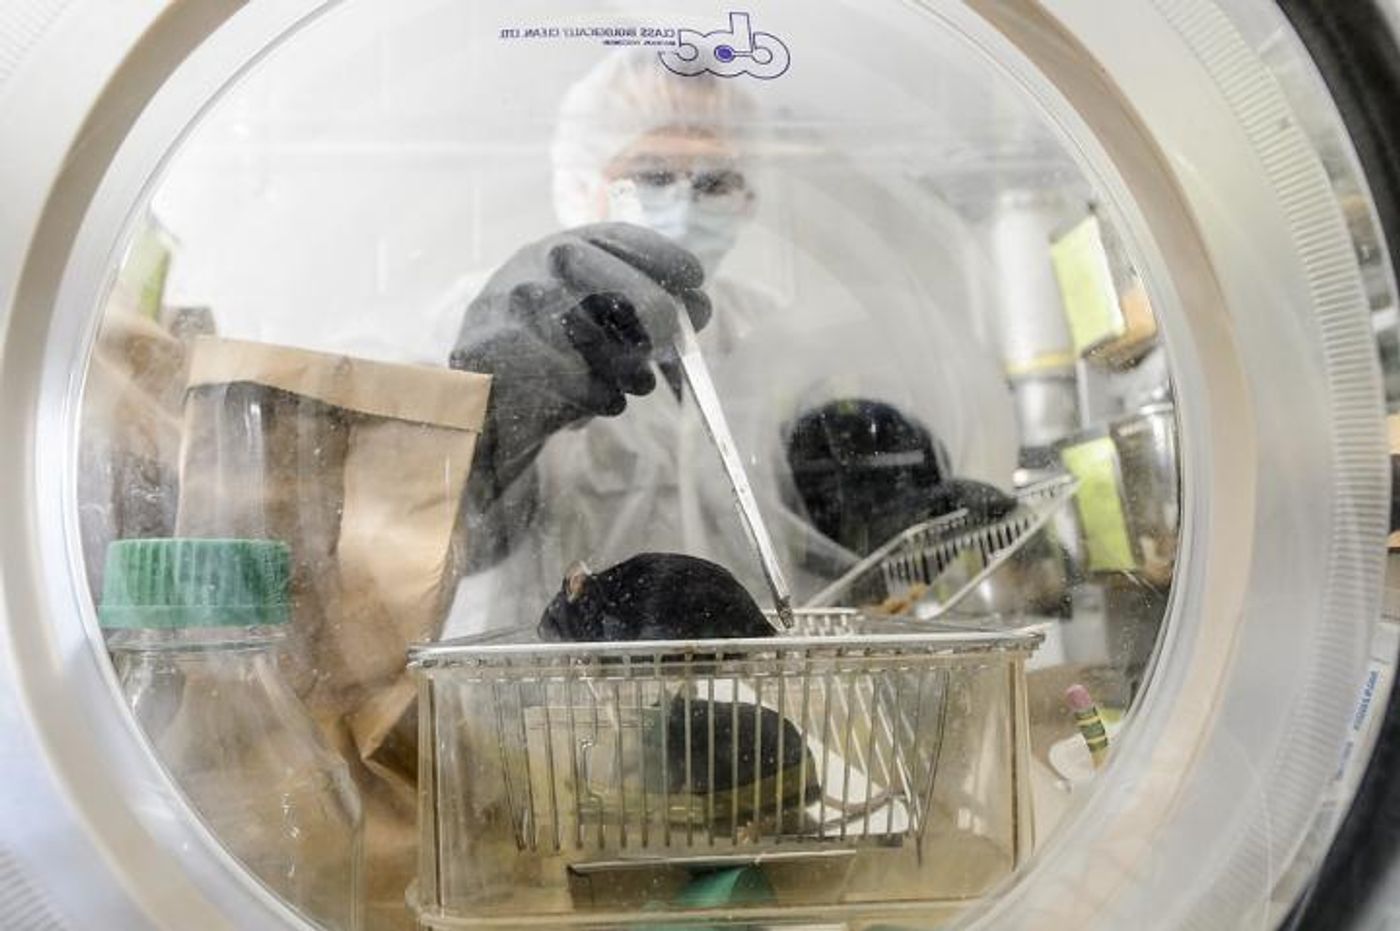 Nacho Vivas, lab manager at the Rey Lab in the Bacteriology Department at the University of Wisconsin-Madison, checks on a group of germ-free mice inside a sterile lab environment on June 22, 2015. / Credit: Bryce Richter/UW-Madison